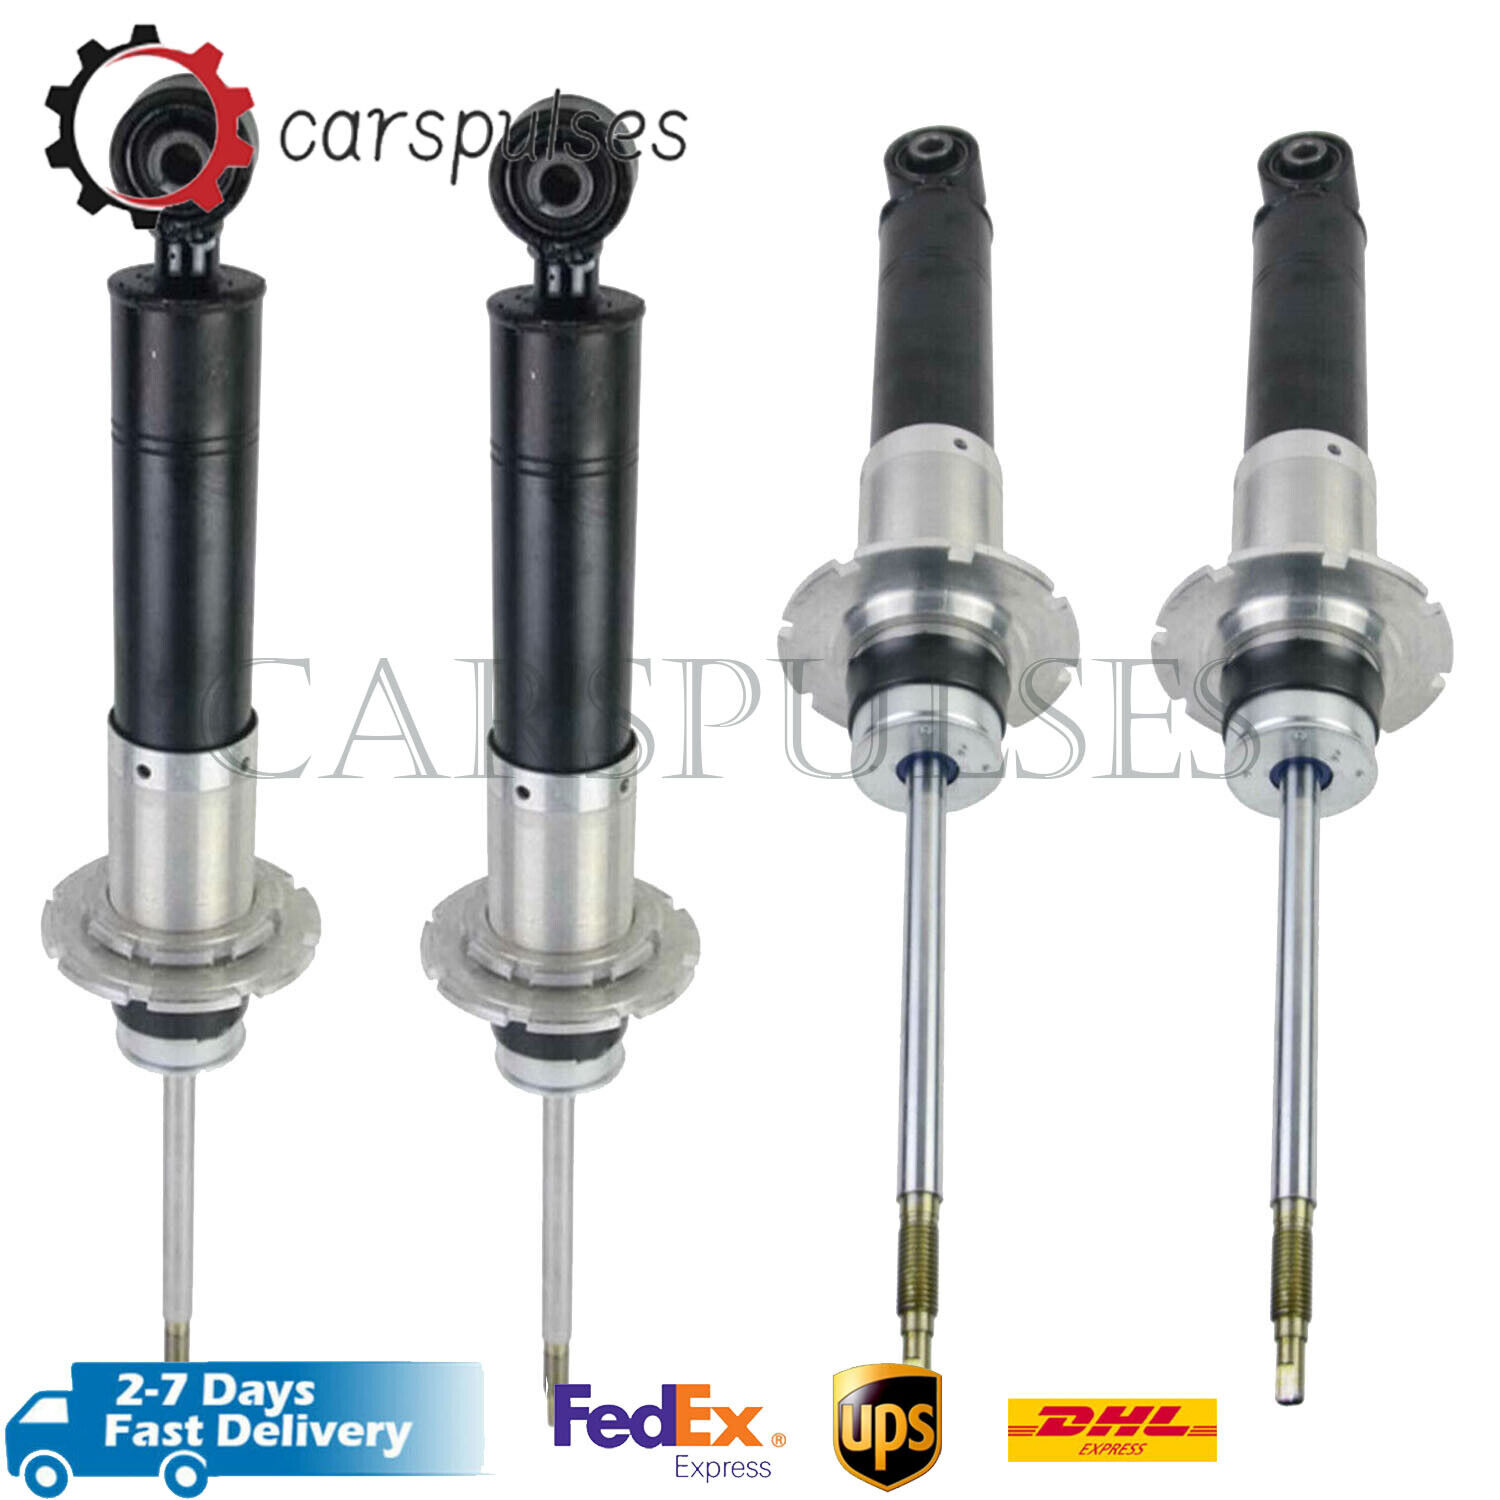 4X For Ferrari California 2008-2014 Front Rear Shock Absorbers w/ Magnetic Ride